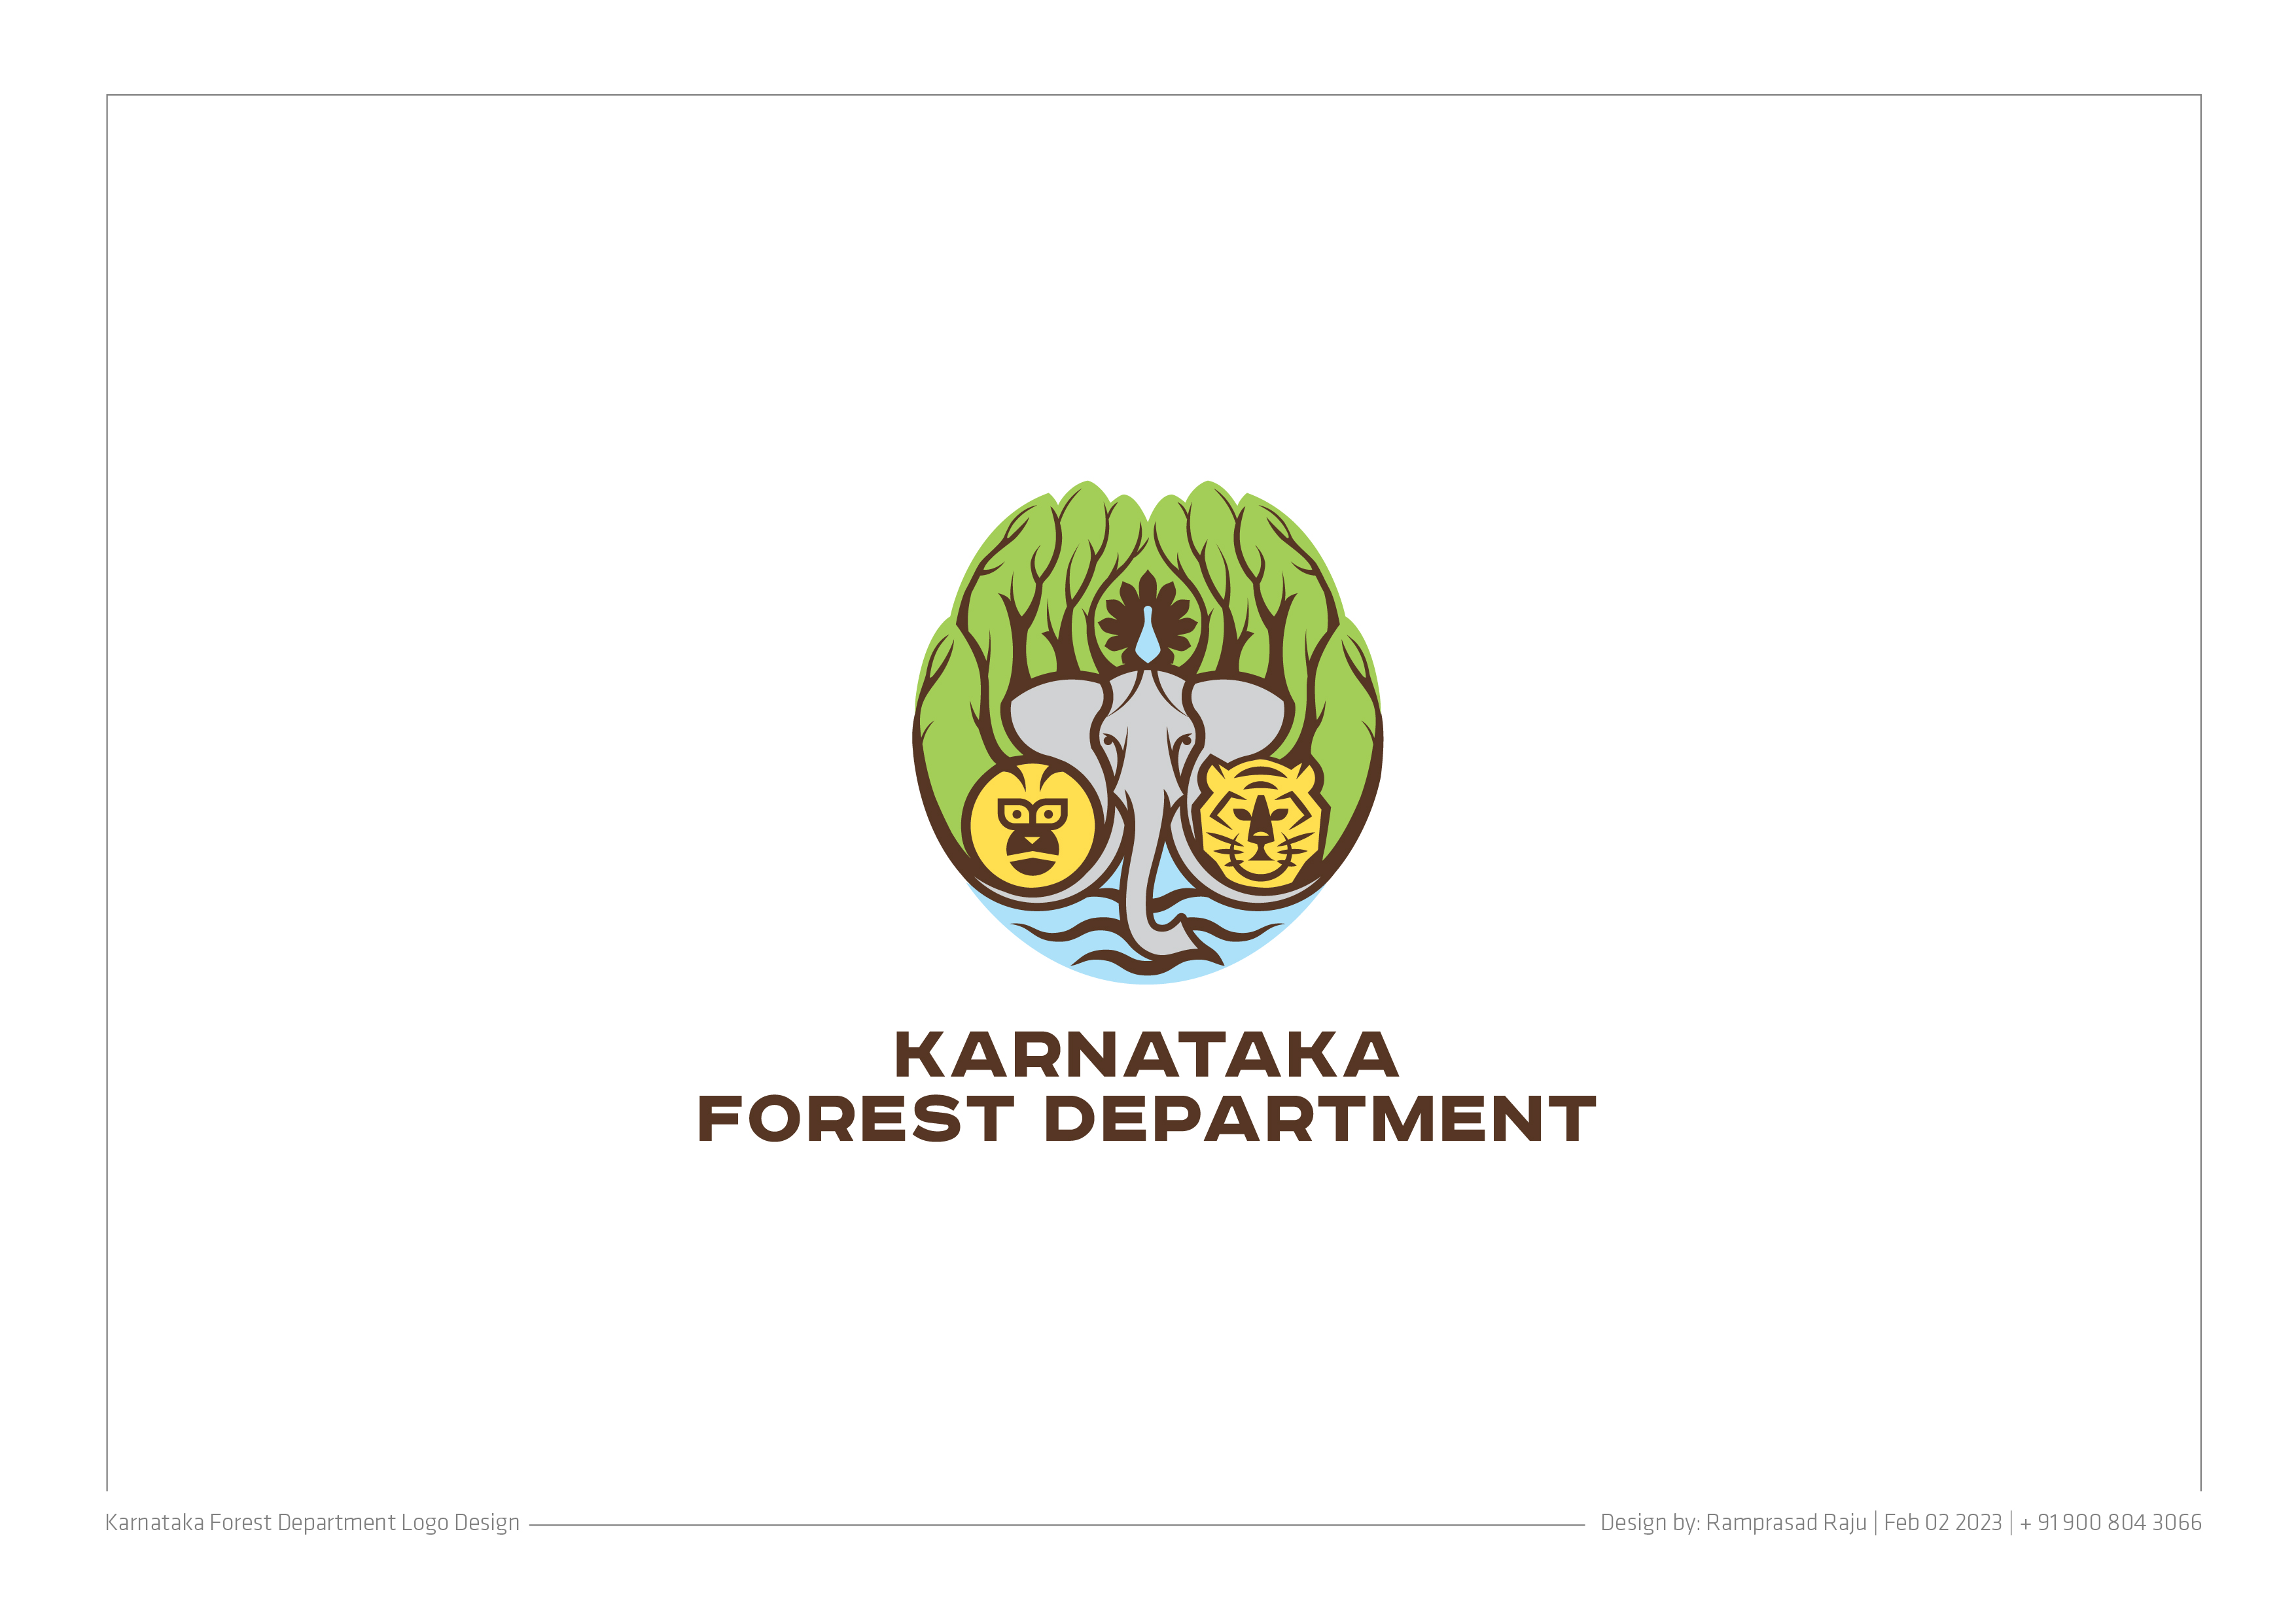 ForestDeptLogo_Ver2_Feb2-01 logo design by logo designer One+and+Only+Design for your inspiration and for the worlds largest logo competition